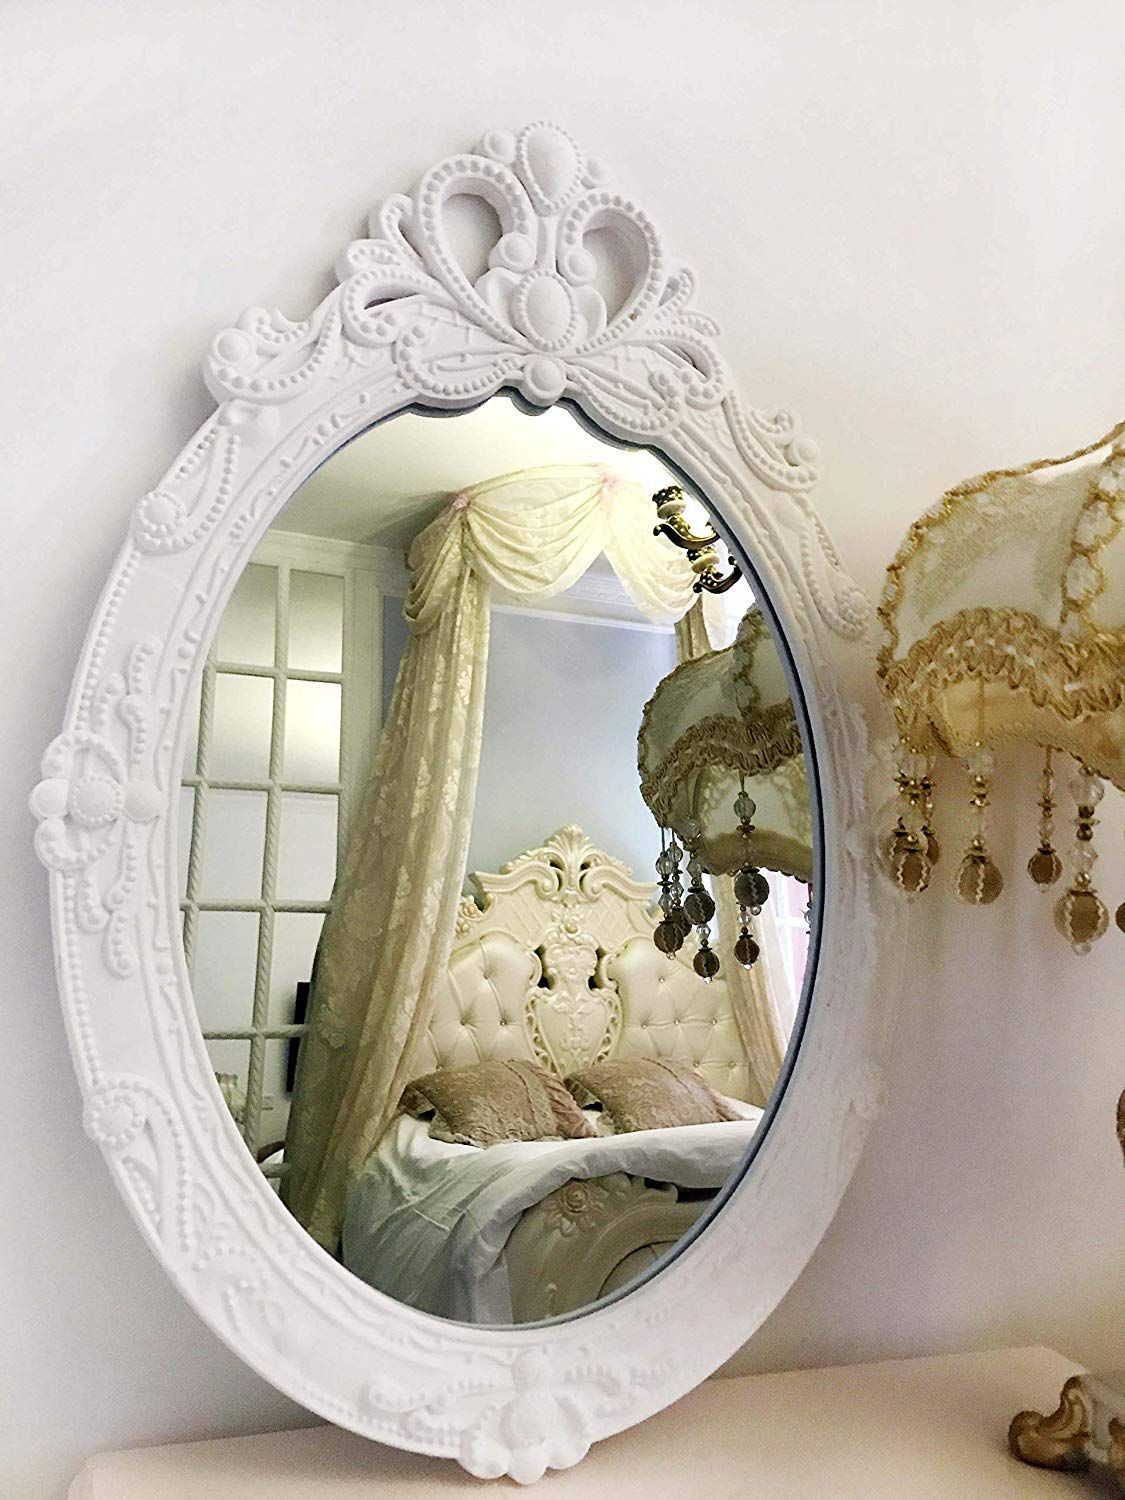 Amazon: Basswood Hunters Oval Vintage Decorative Wall Mirror, White Inside White Wall Mirrors (View 7 of 15)